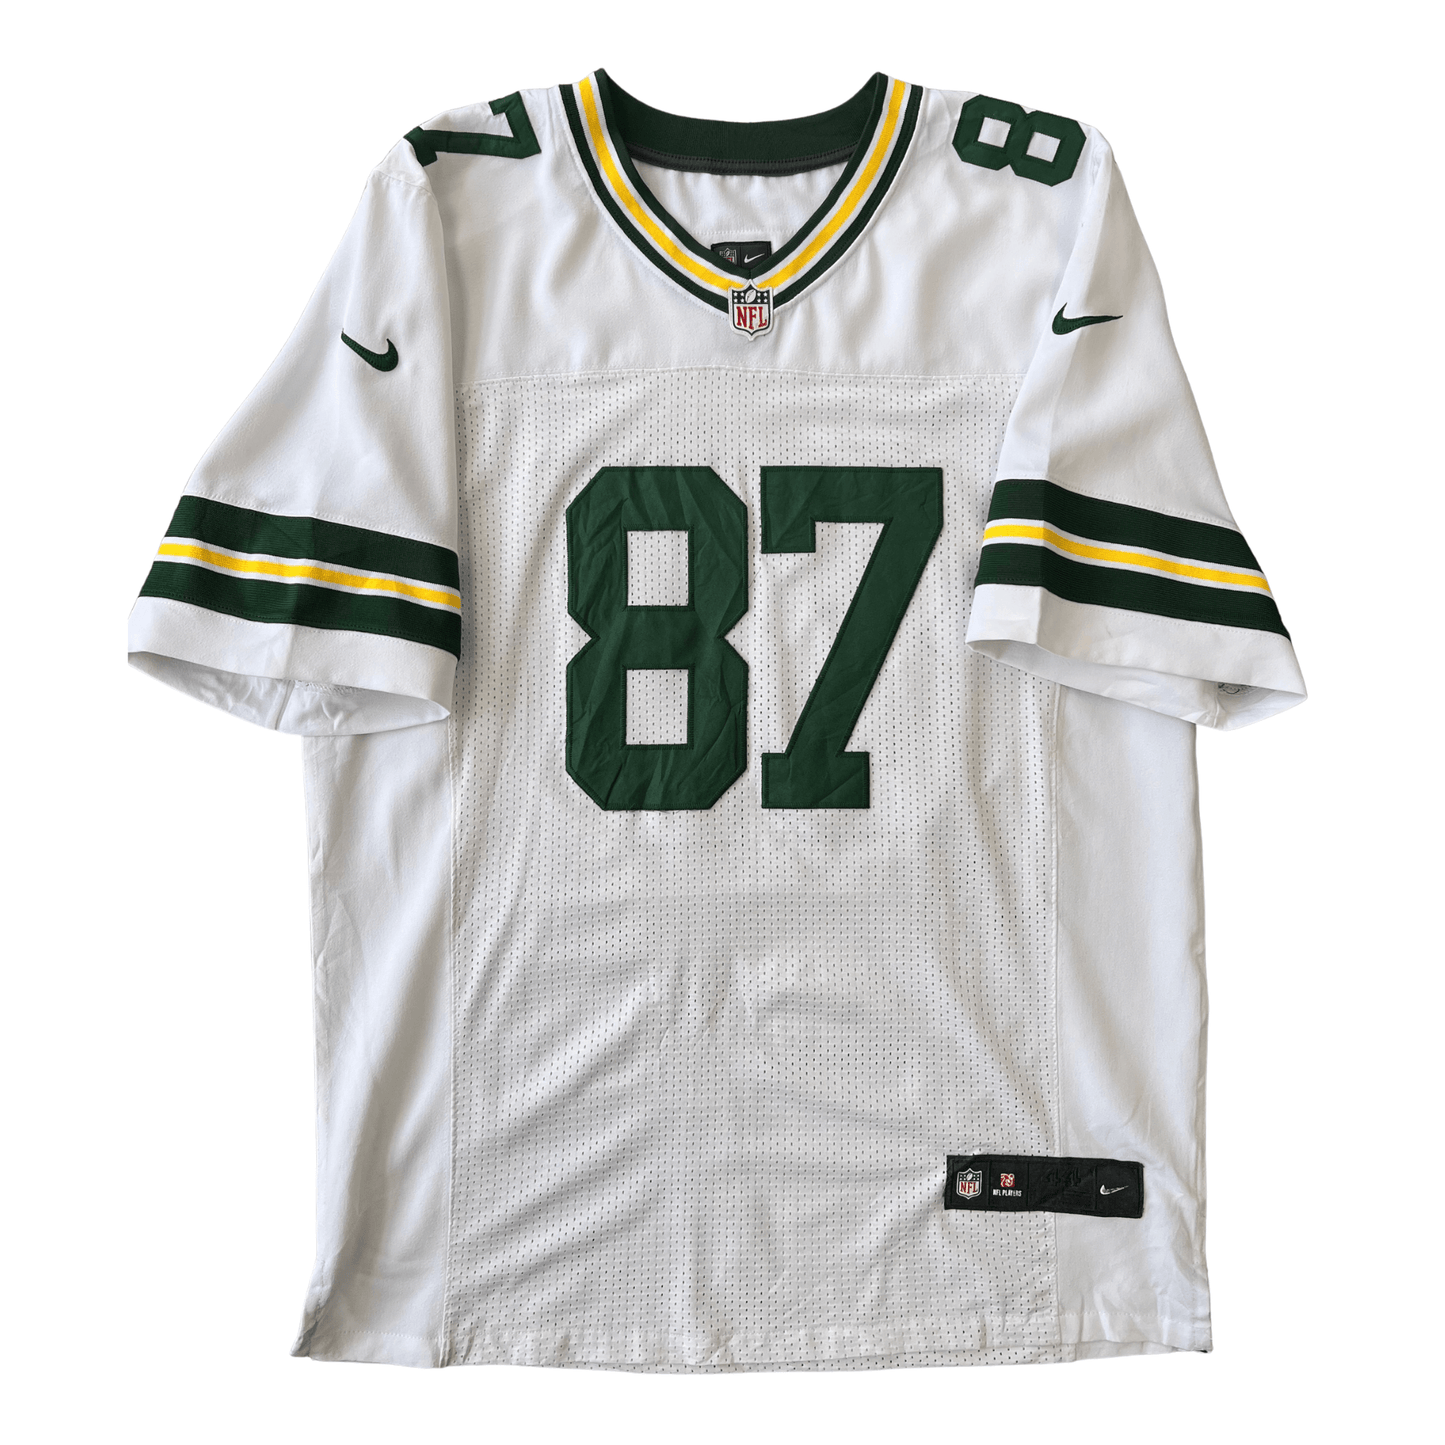 Green Bay Packers White Jersey Front - Jordy Nelson